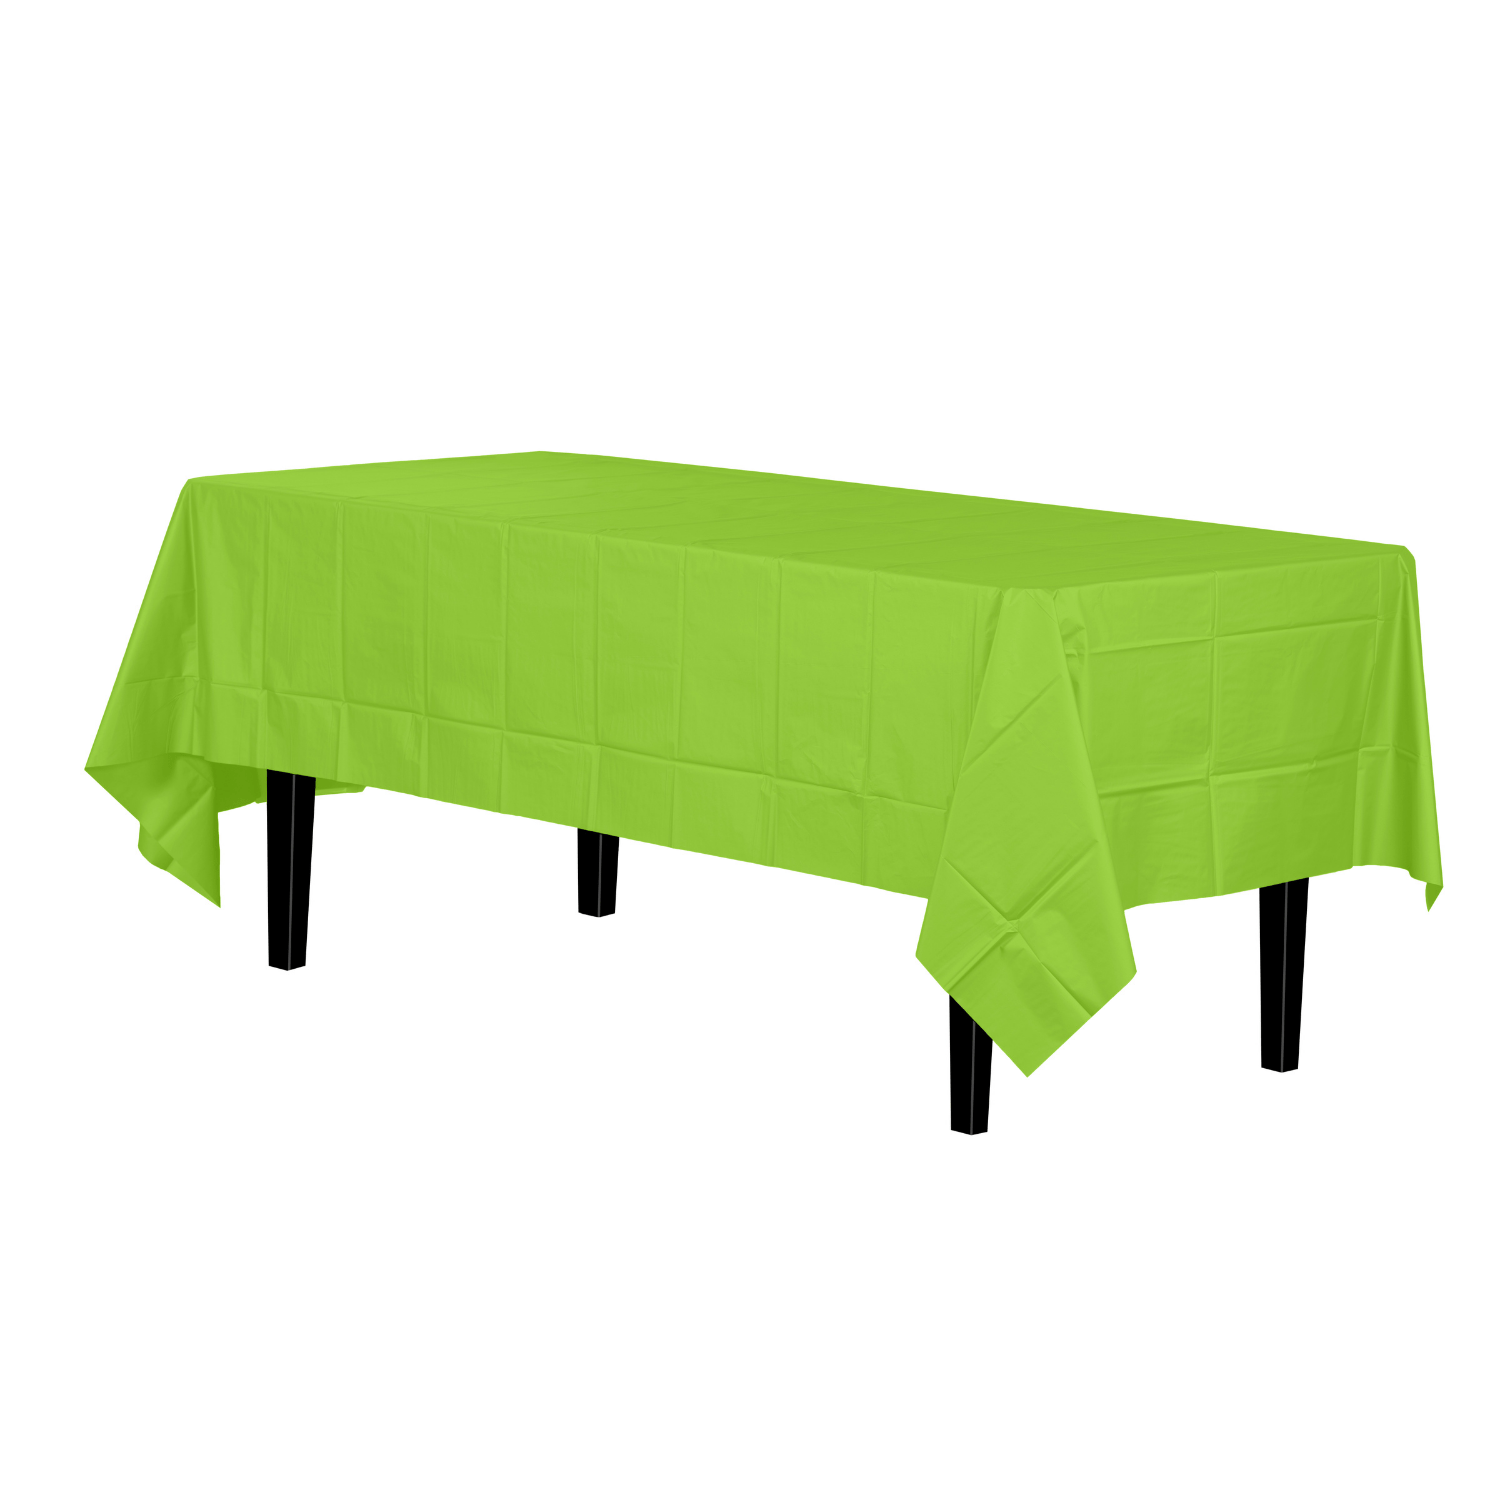 Premium Lime Green Plastic Tablecloth | 96 Count